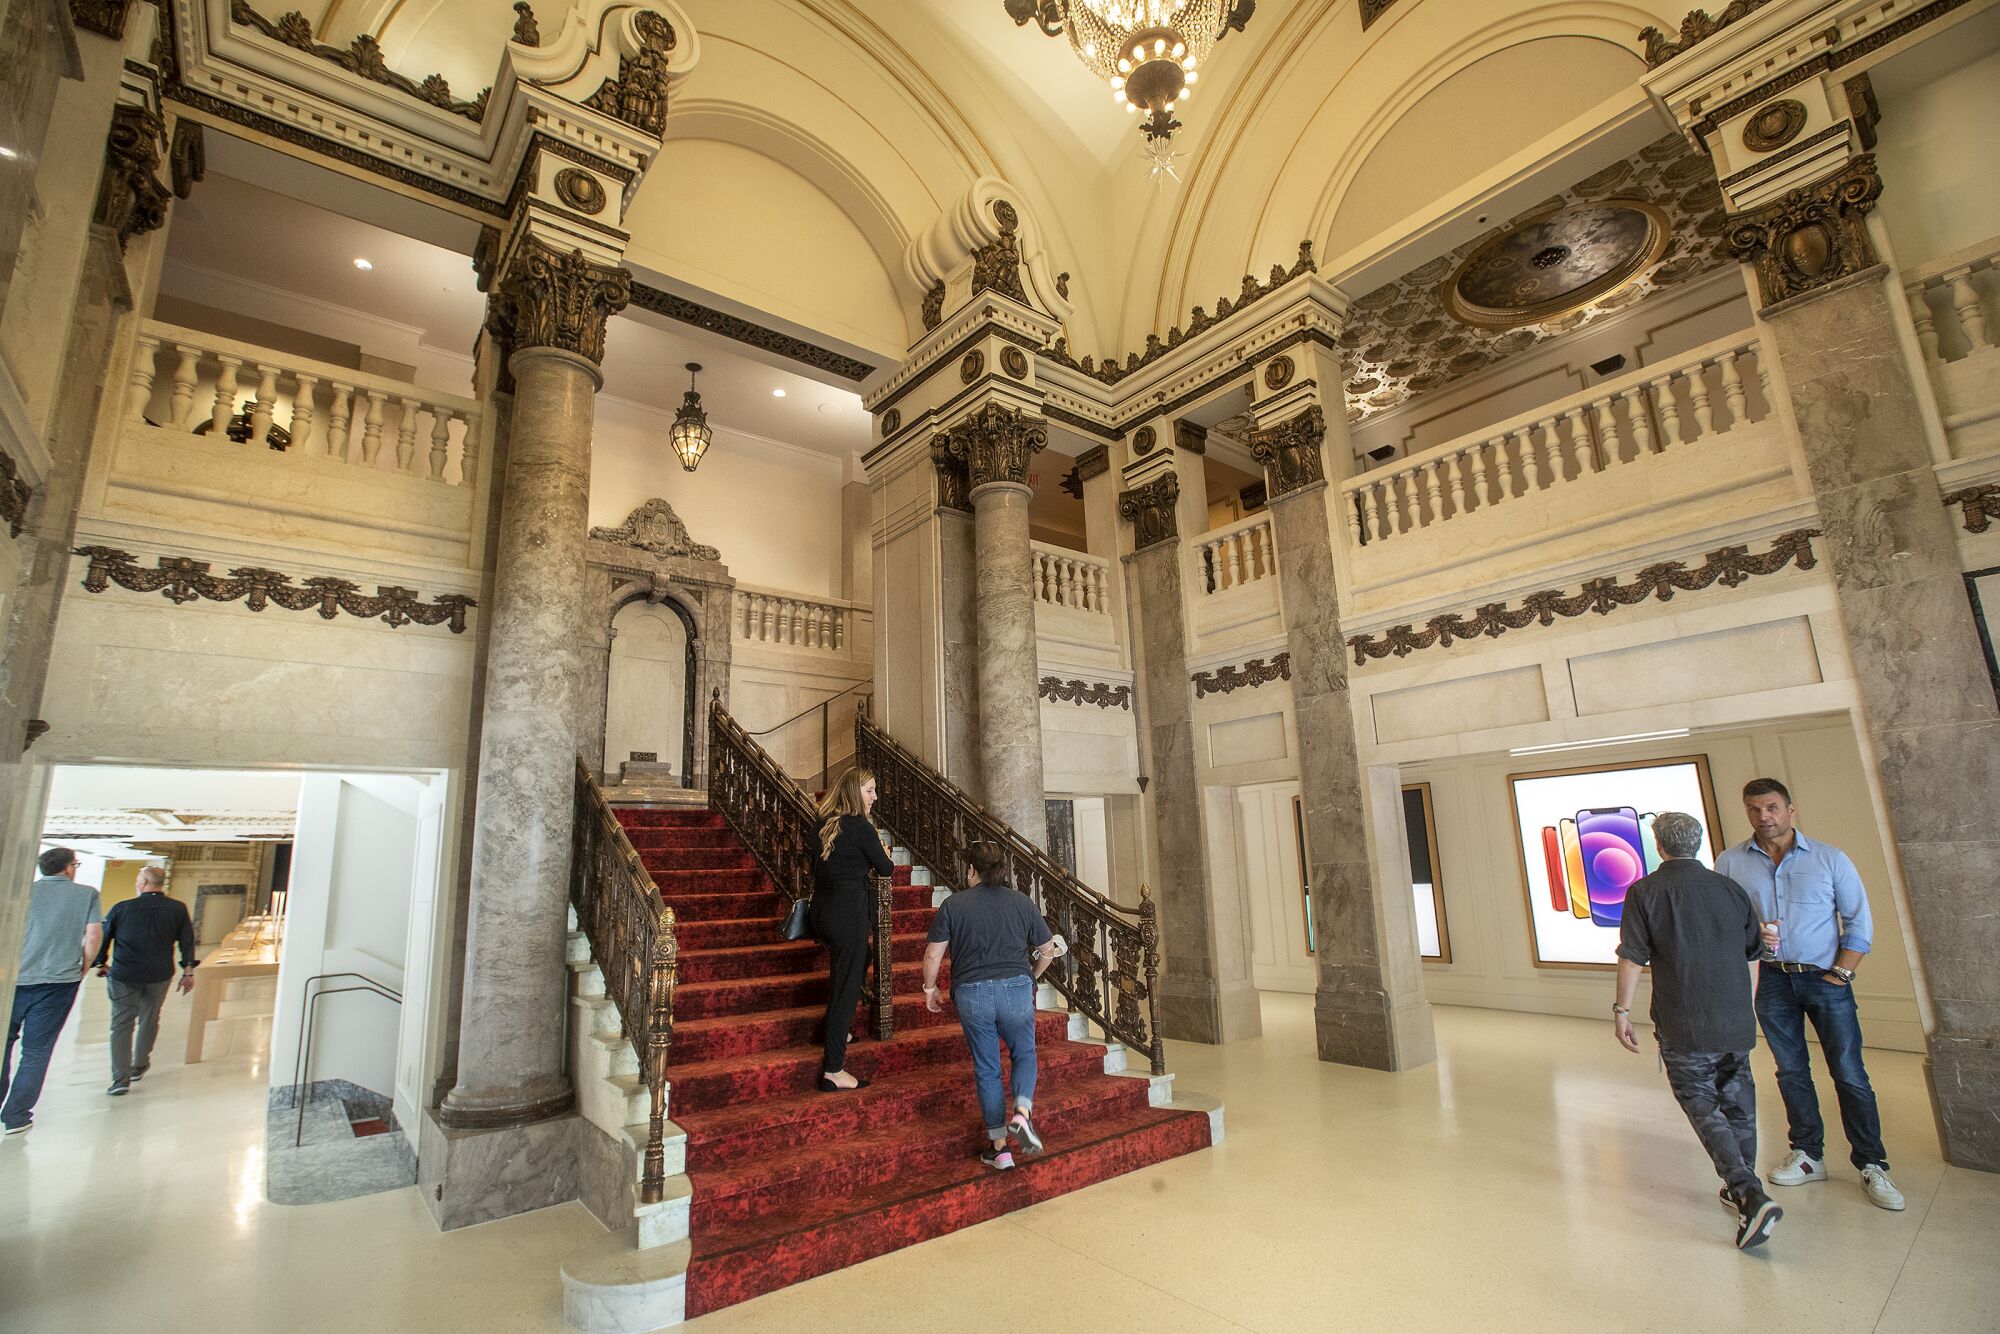 Customers ascend a staircase clad in red carpet that is framed by brass handrails and marble columns